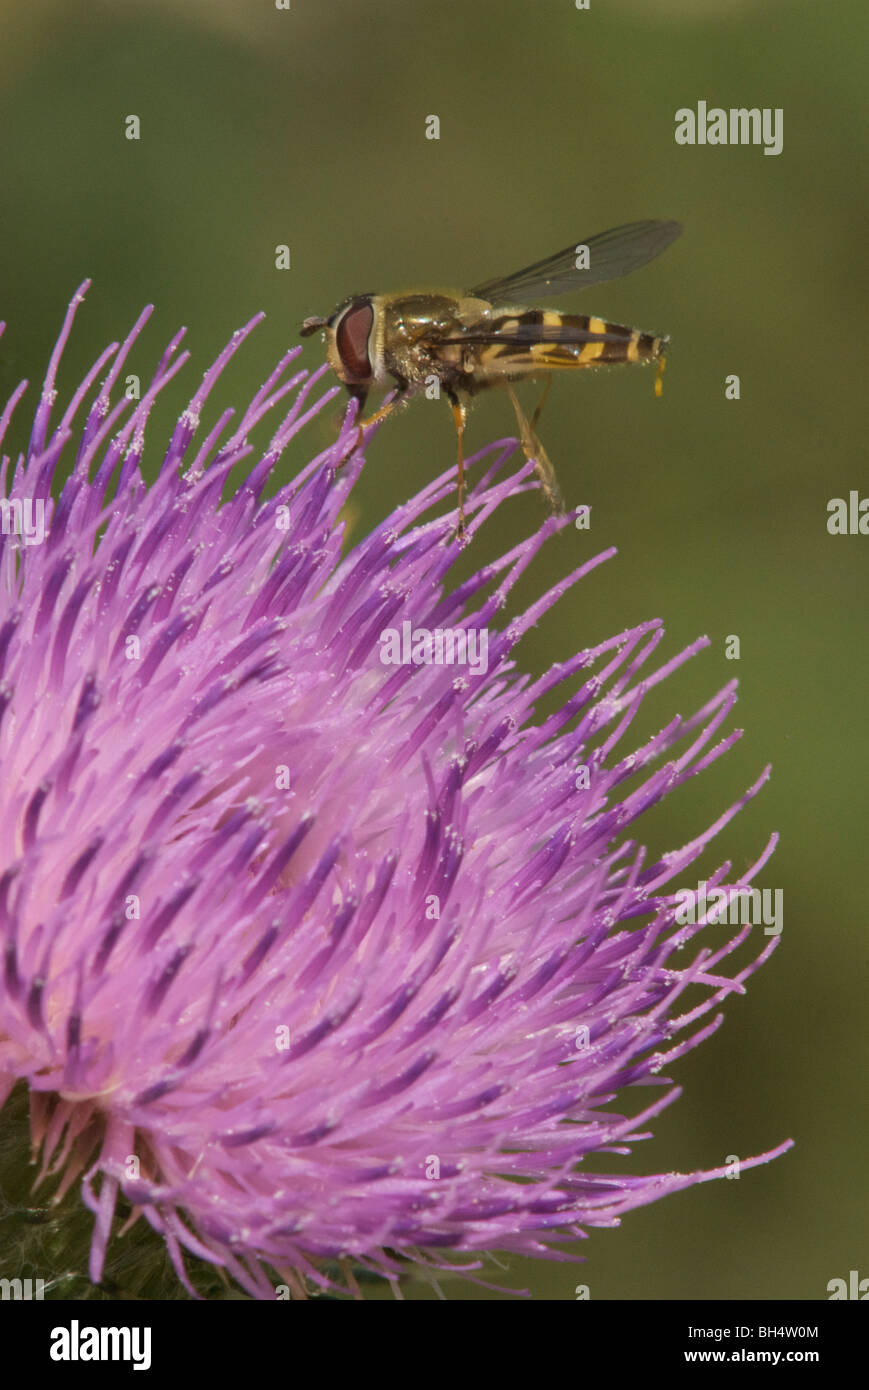 Wasp-like hover fly (syrphus ribesii) collecting nectar on a purple thistle (onopordum compositae). Stock Photo